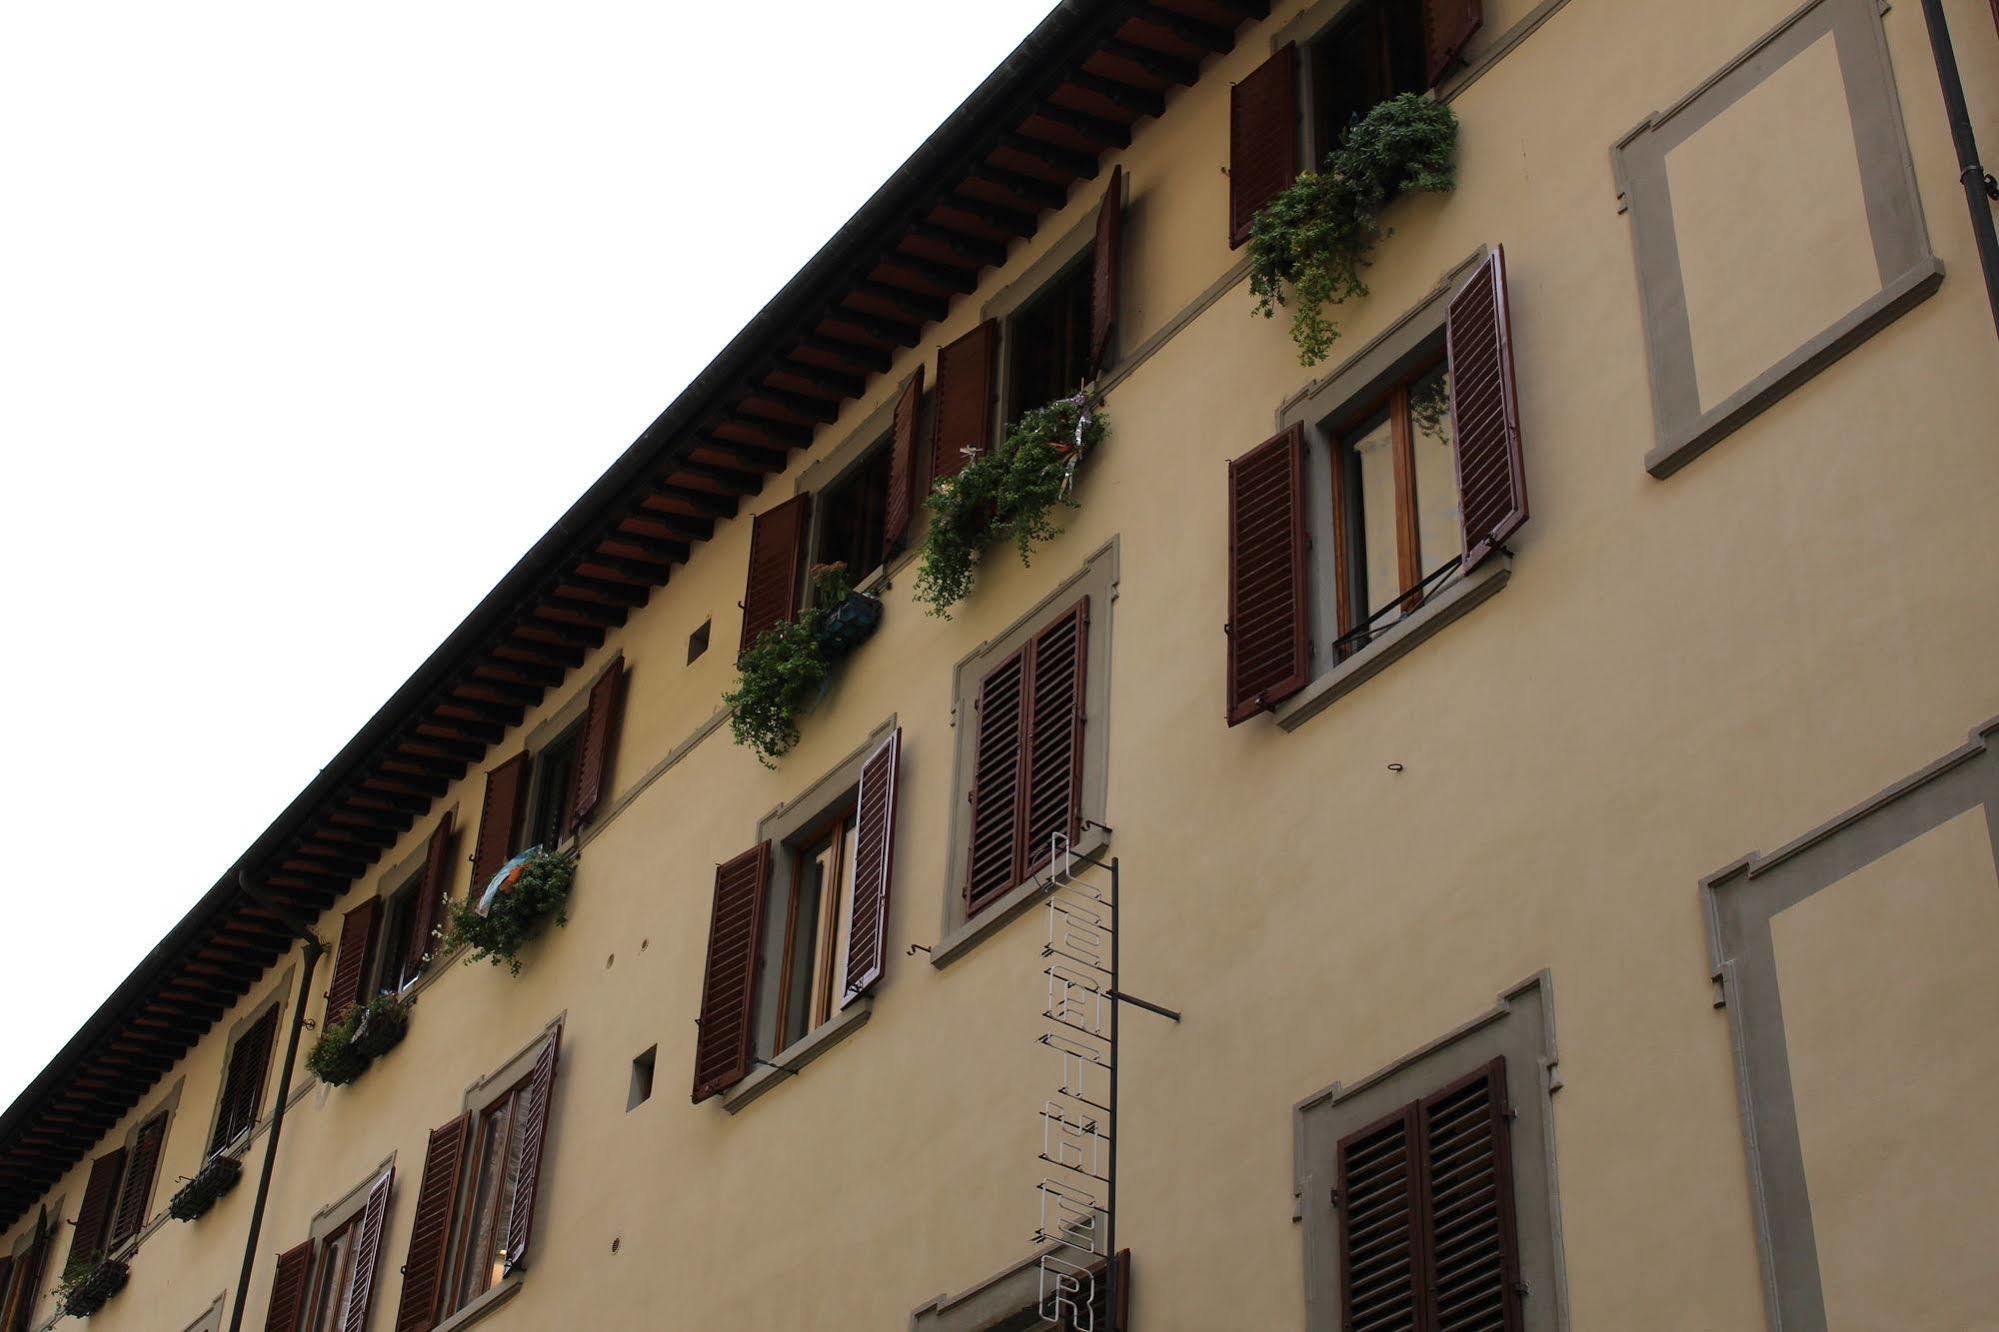 B & B Righi In Santa Croce Florence Exterior photo